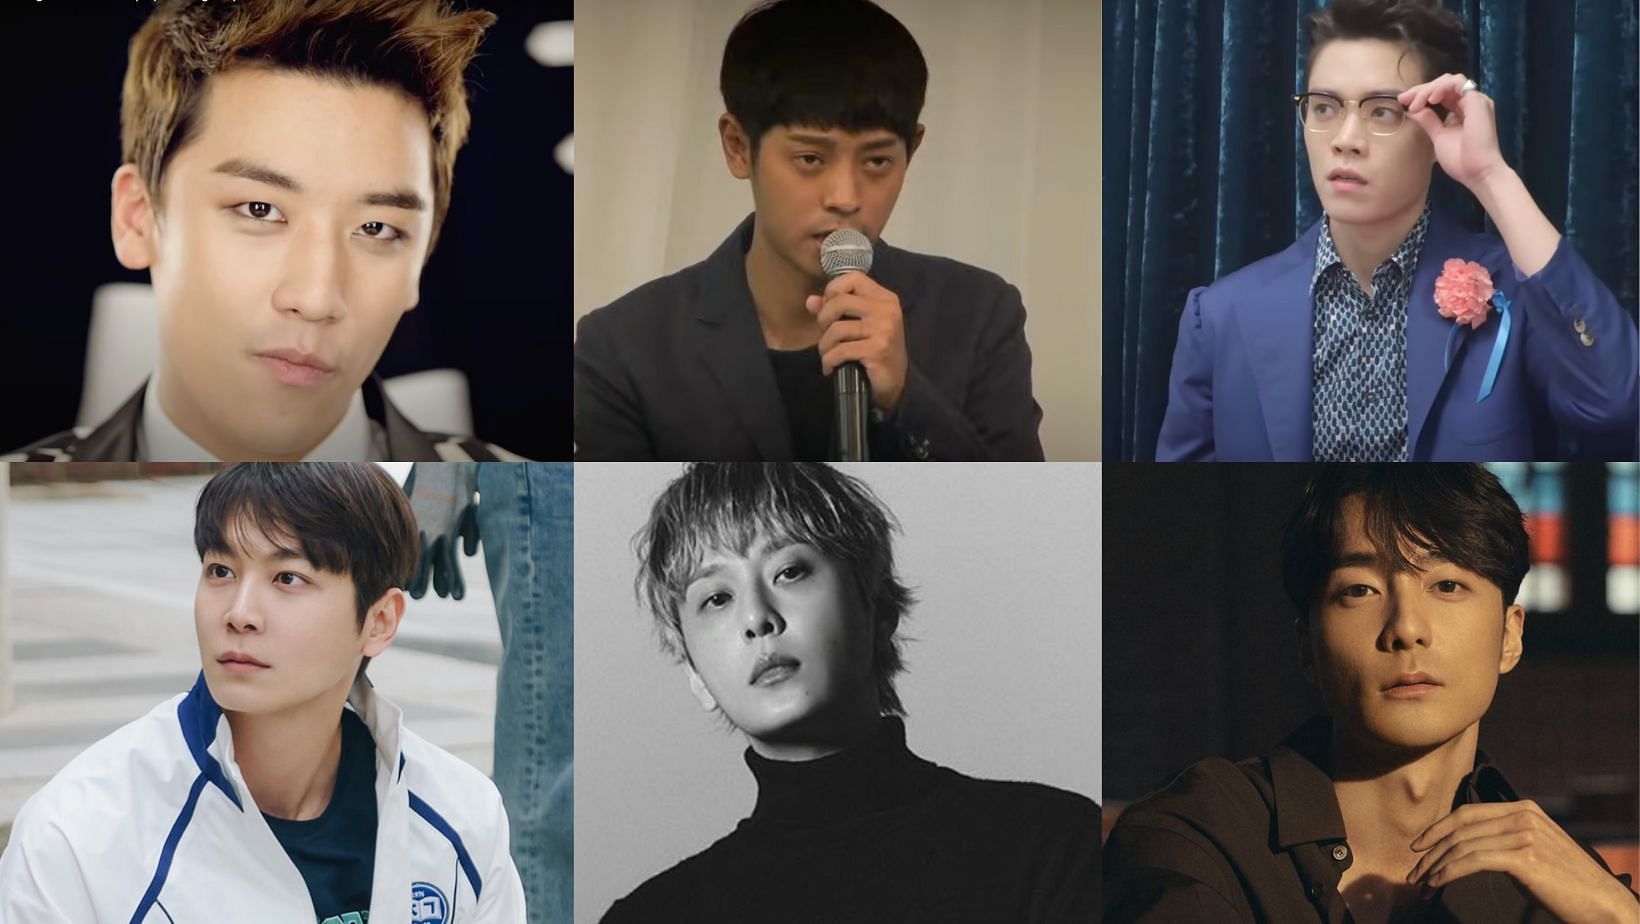 The Burning Sun scandal chatroom members and their roles in the criminal incident. (Images via YouTube/BBC World Service, Eddy Kim and Instagram/@bigbadboii, @lcdoubleu, @roykimmusic)